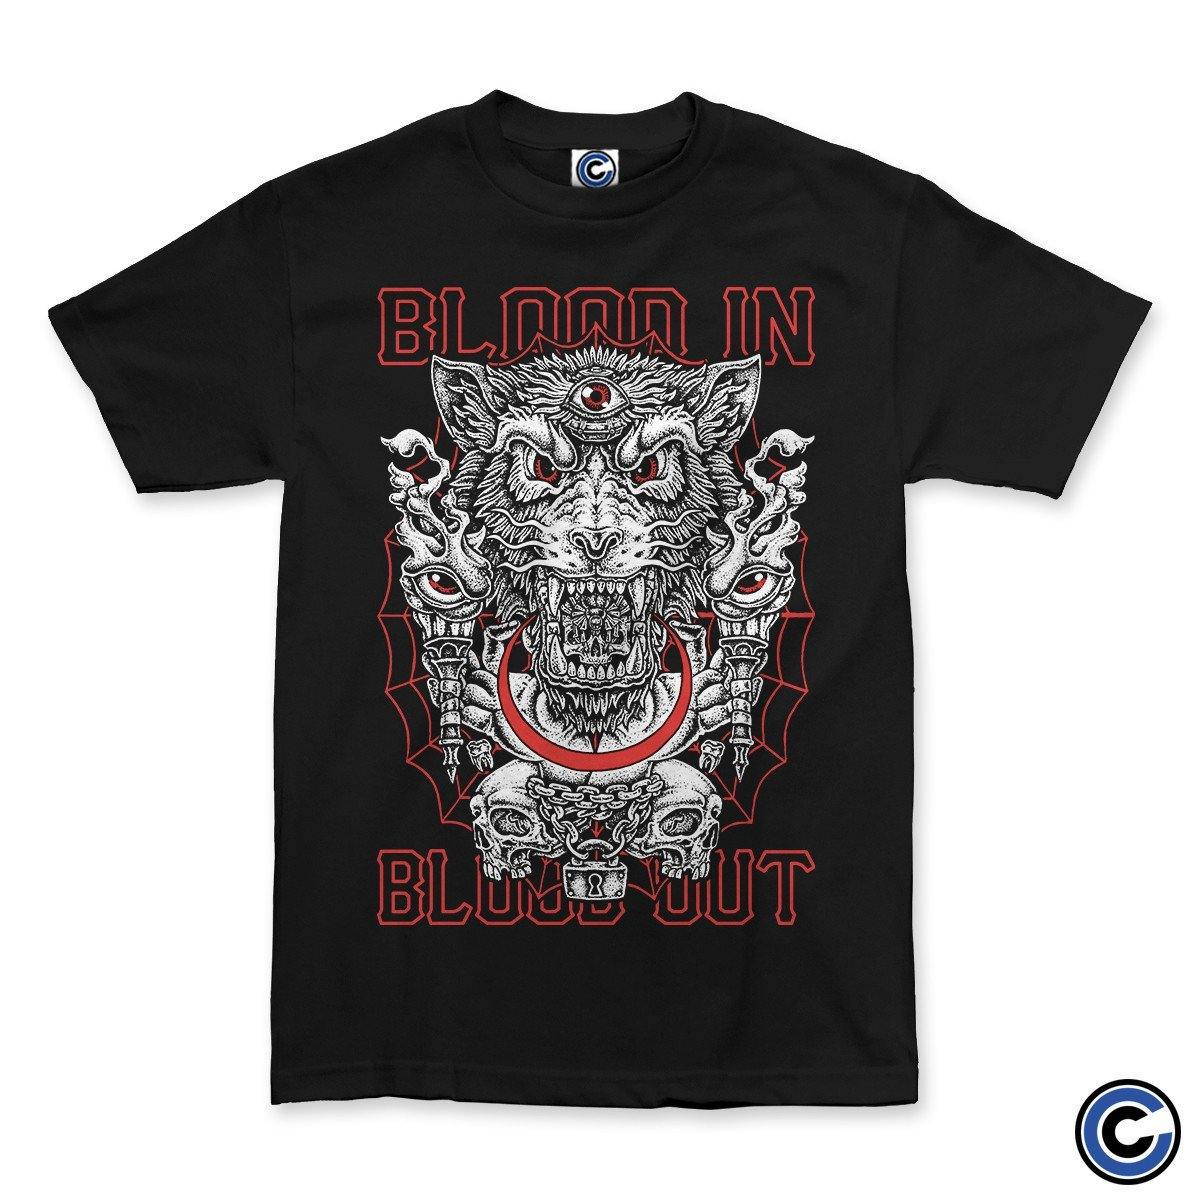 Buy – Blood In Blood Out "Spiderwolf" Shirt – Band & Music Merch – Cold Cuts Merch